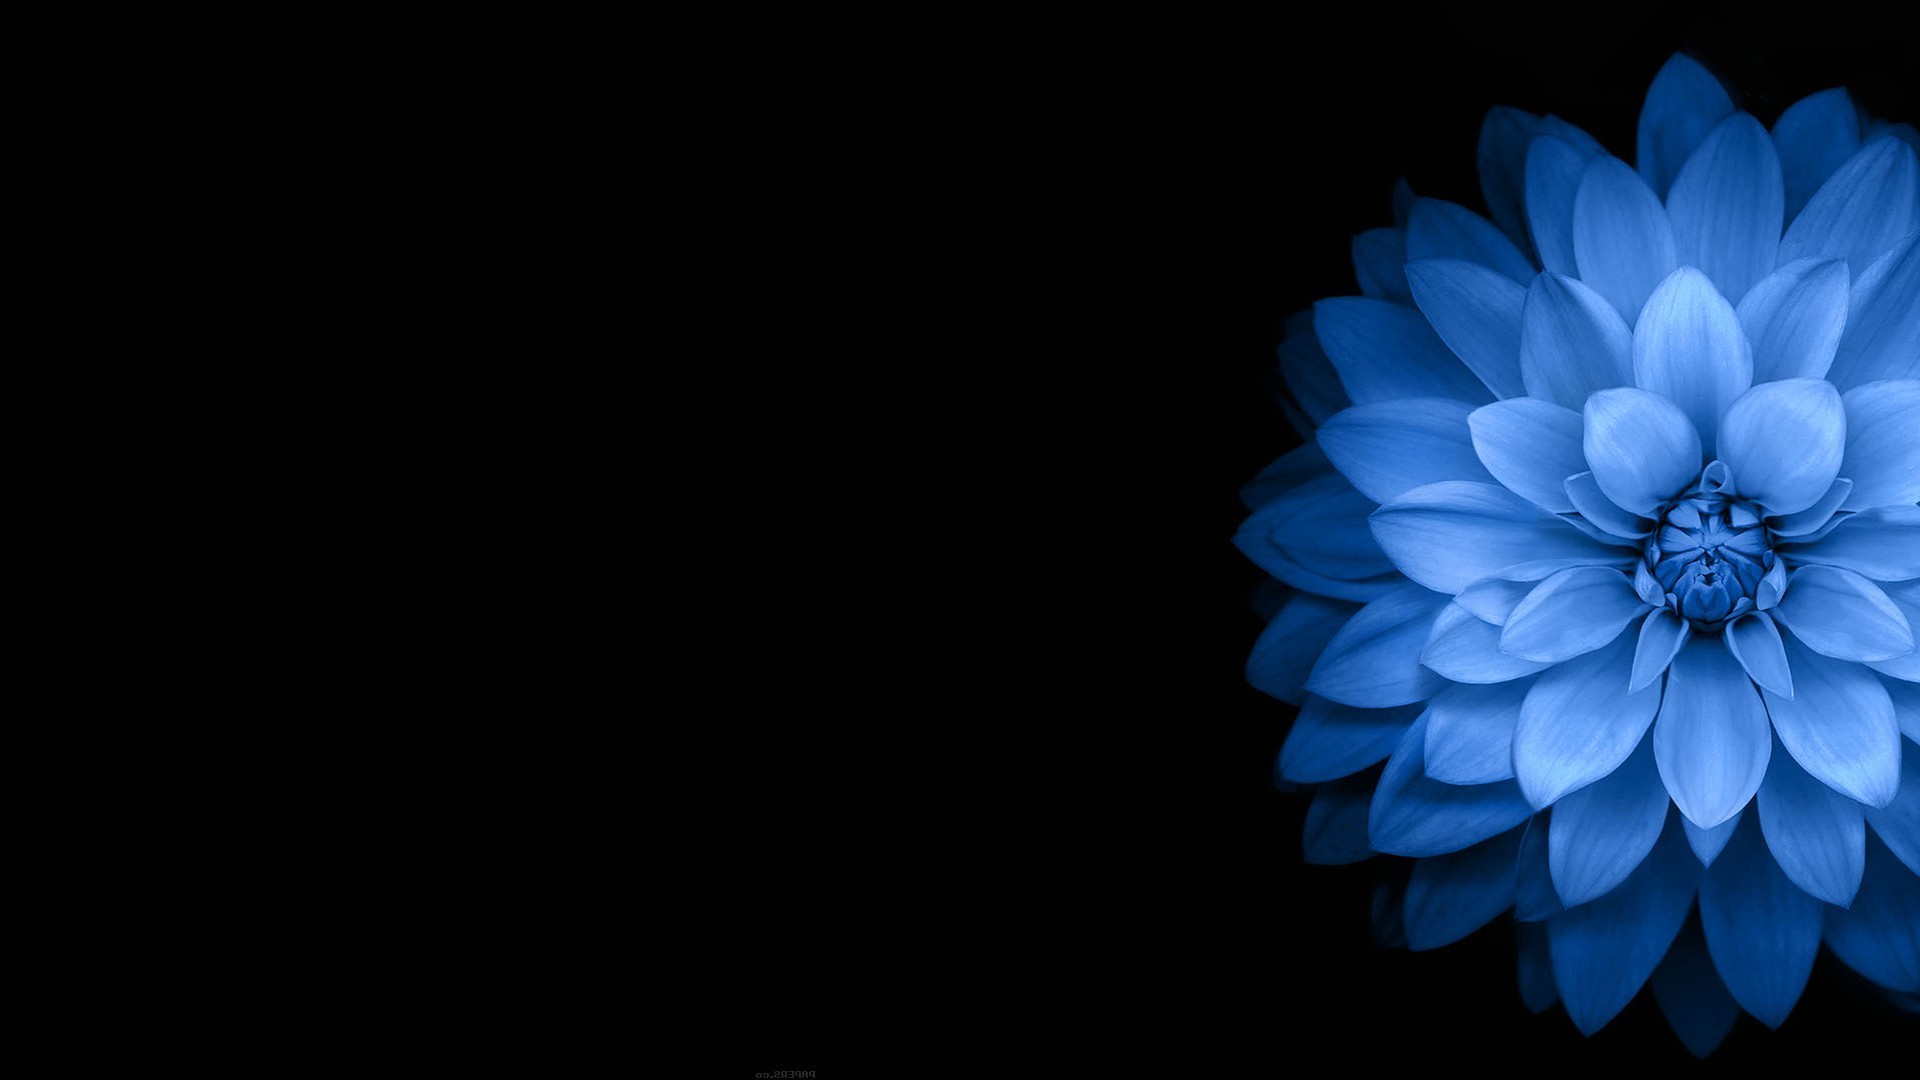 1920x1080 ... Flowers: Blue Rose Flower Dark Hd Wallpaper For Android for HD 16 .